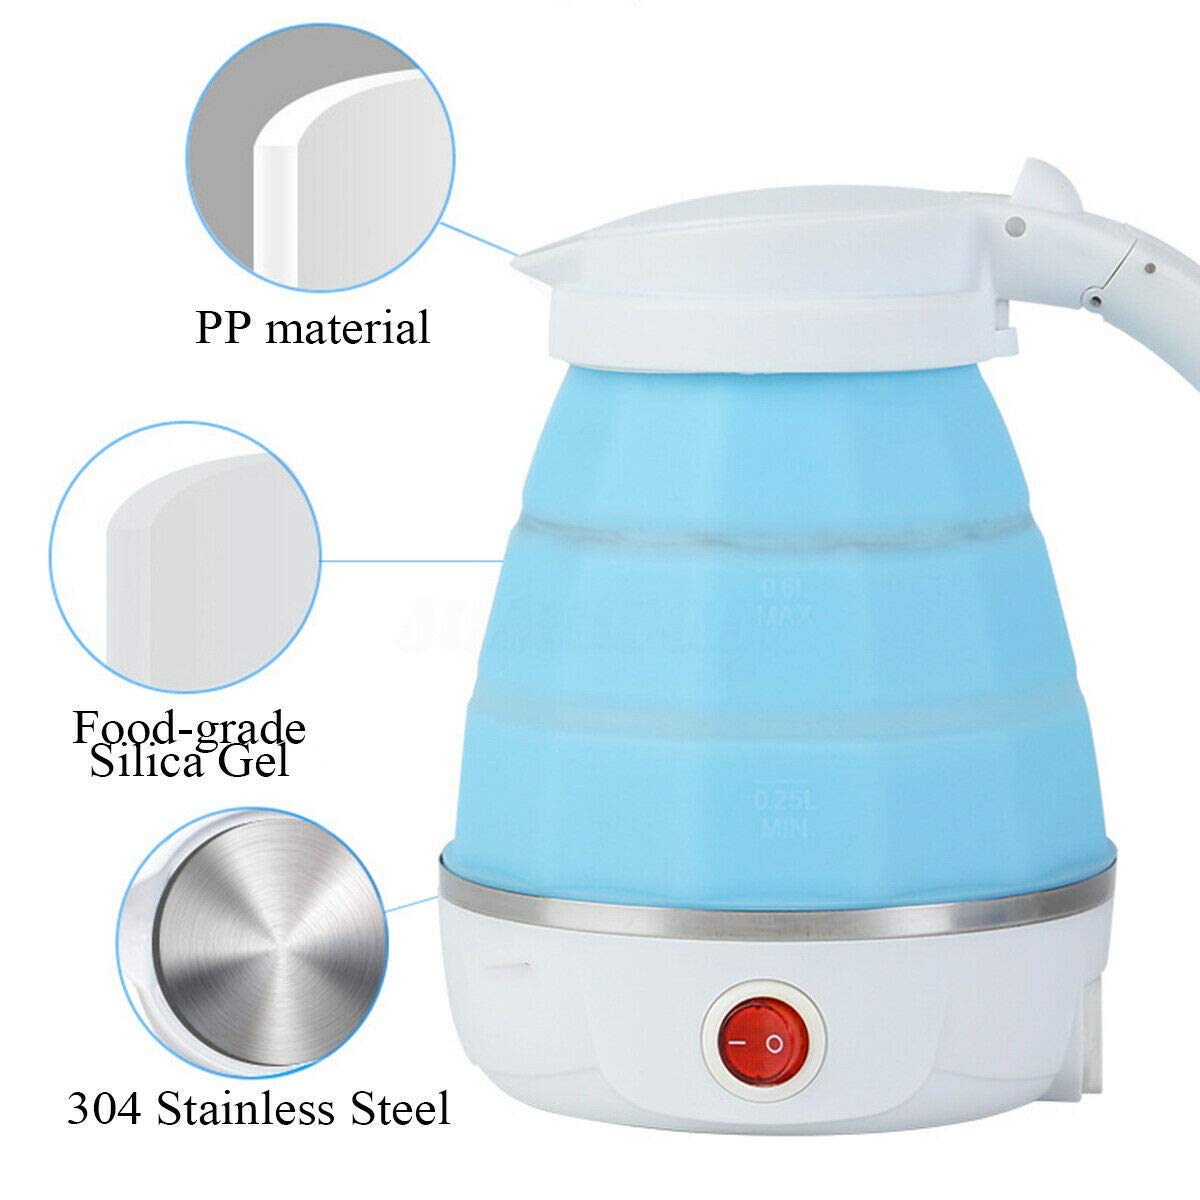 Travel Electric Kettle, Portable Foldable 600ml Kettle, Collapsible Silicon 220v 50hz For Tea Coffee Hot Water